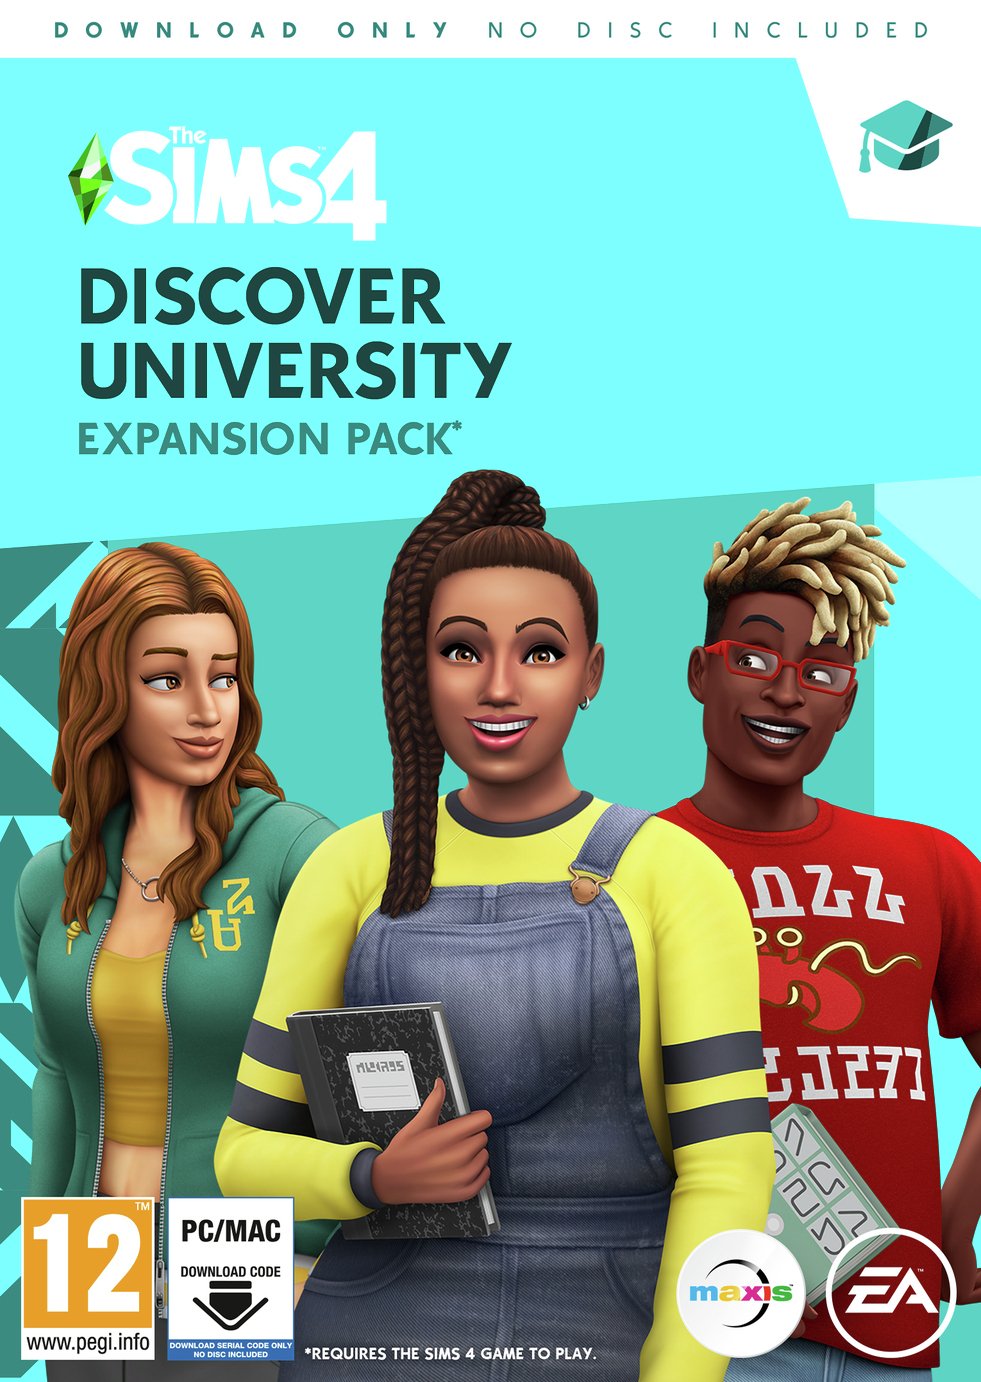 The Sims 4: Discover University Expansion Pack for PC